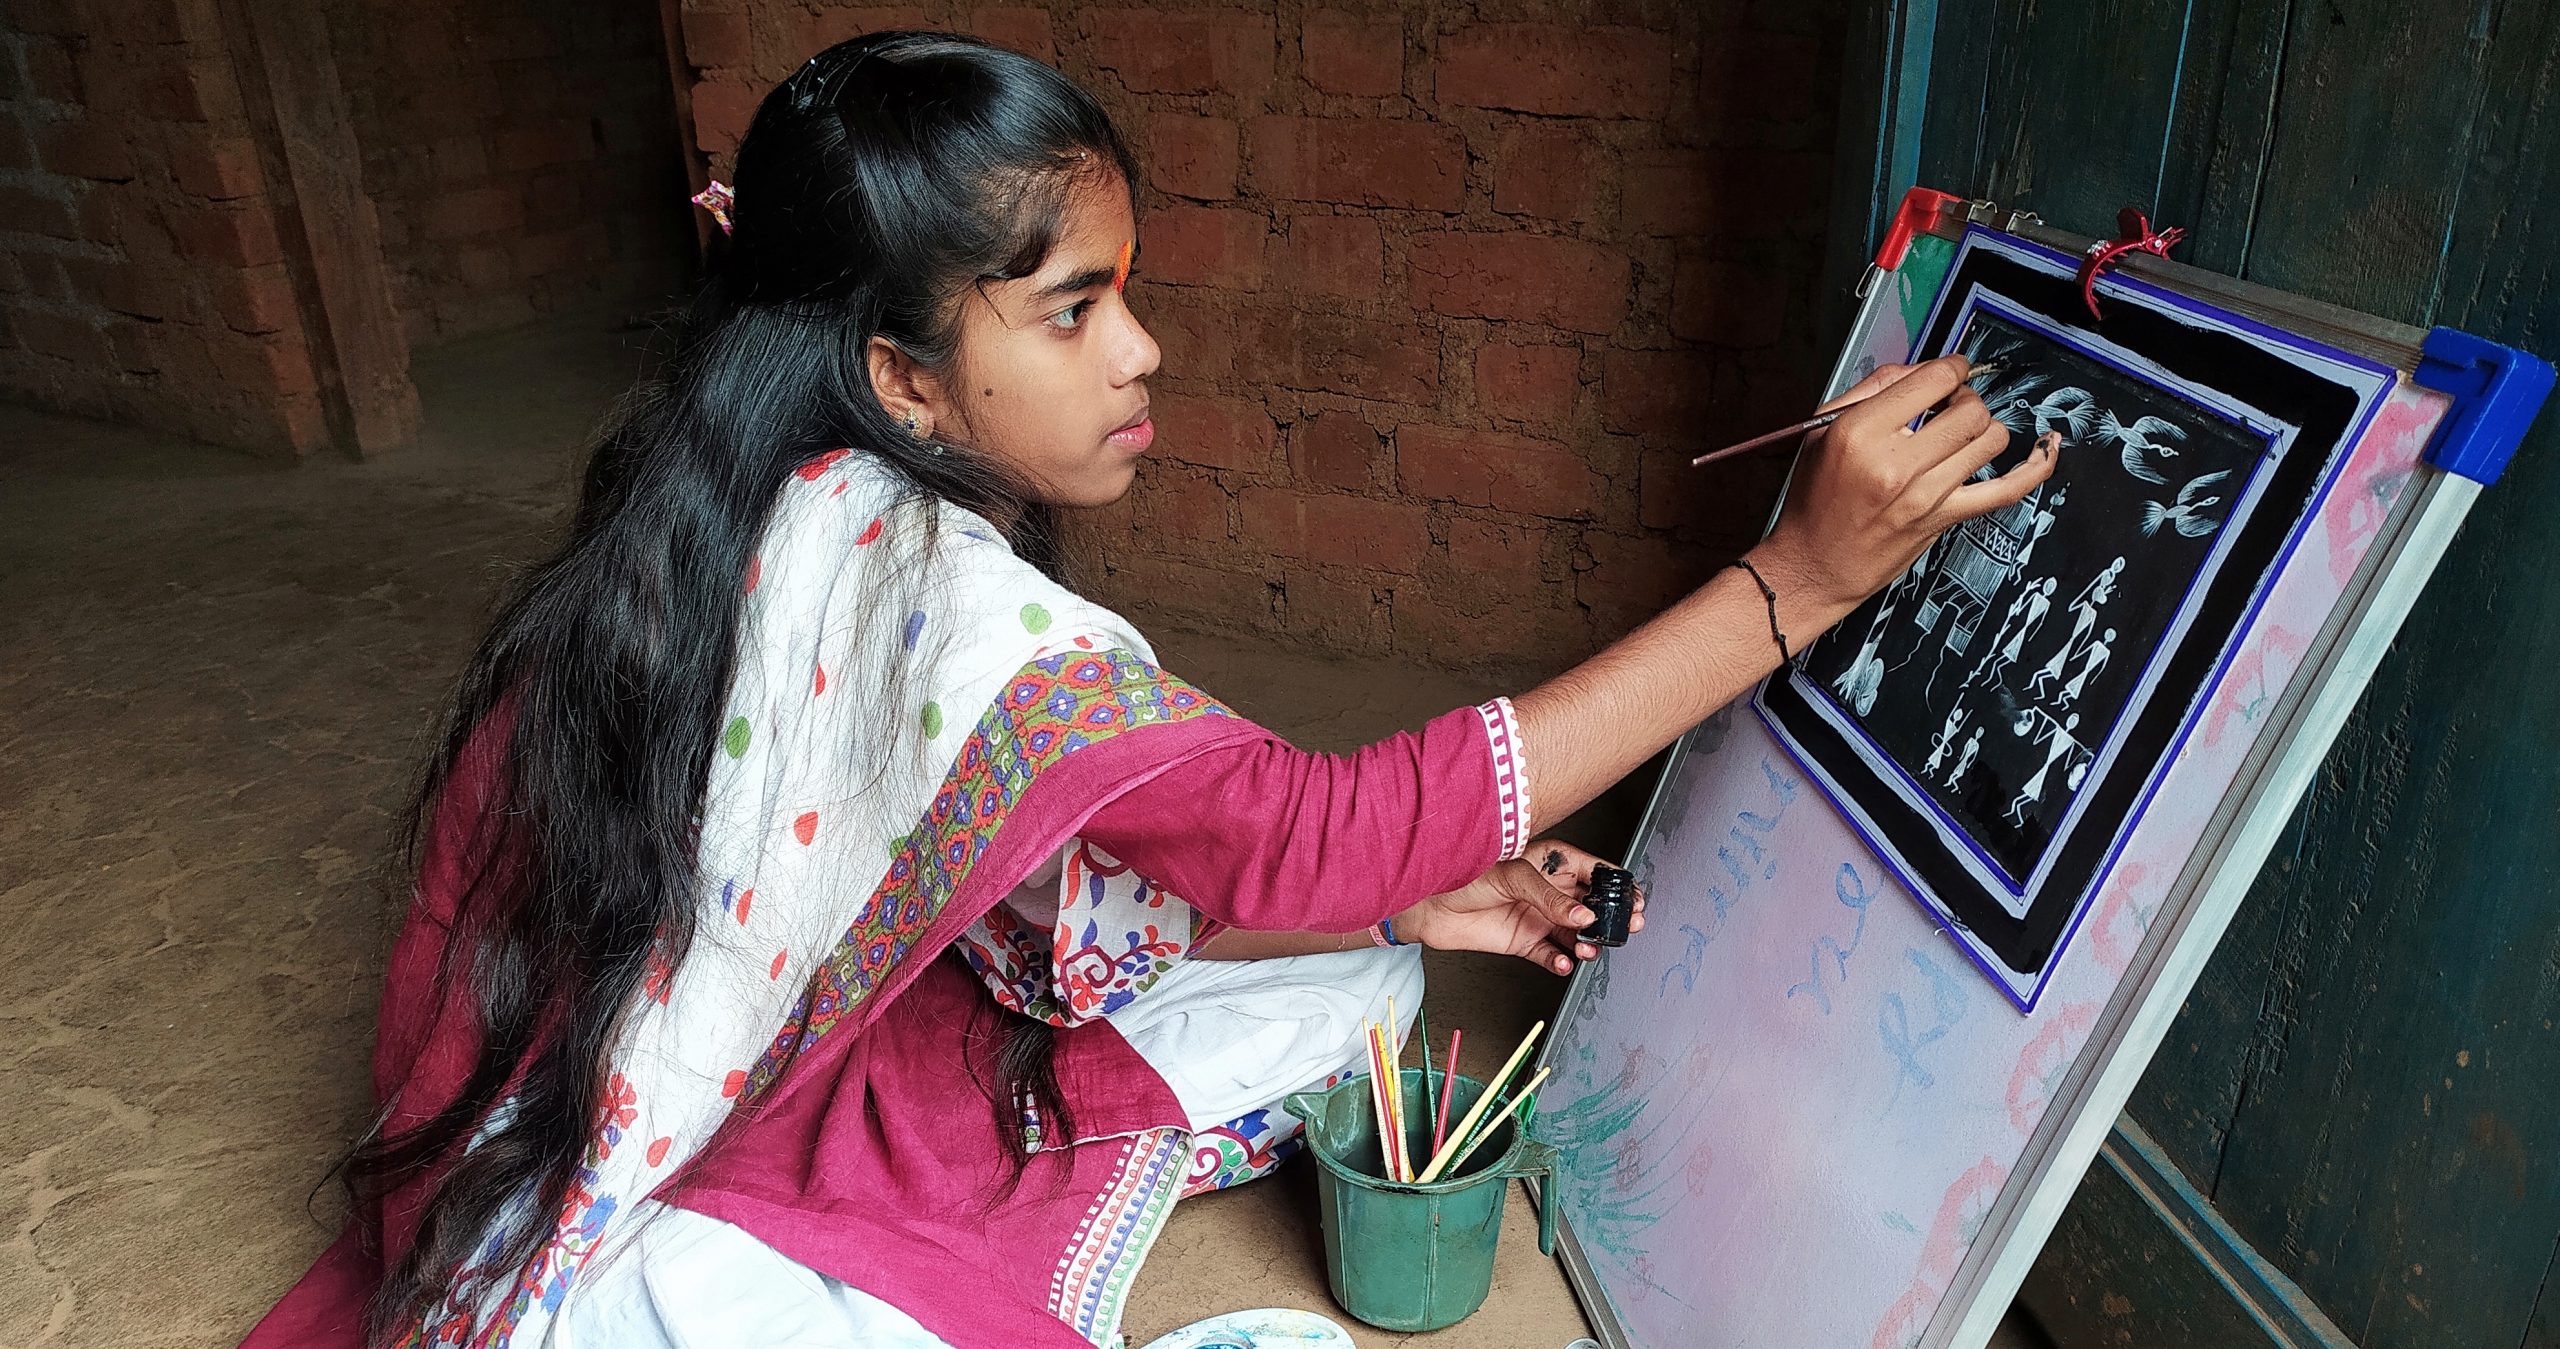 Child making art. Learning Links Foundation supports students and teachers through professional development opportunities in India.